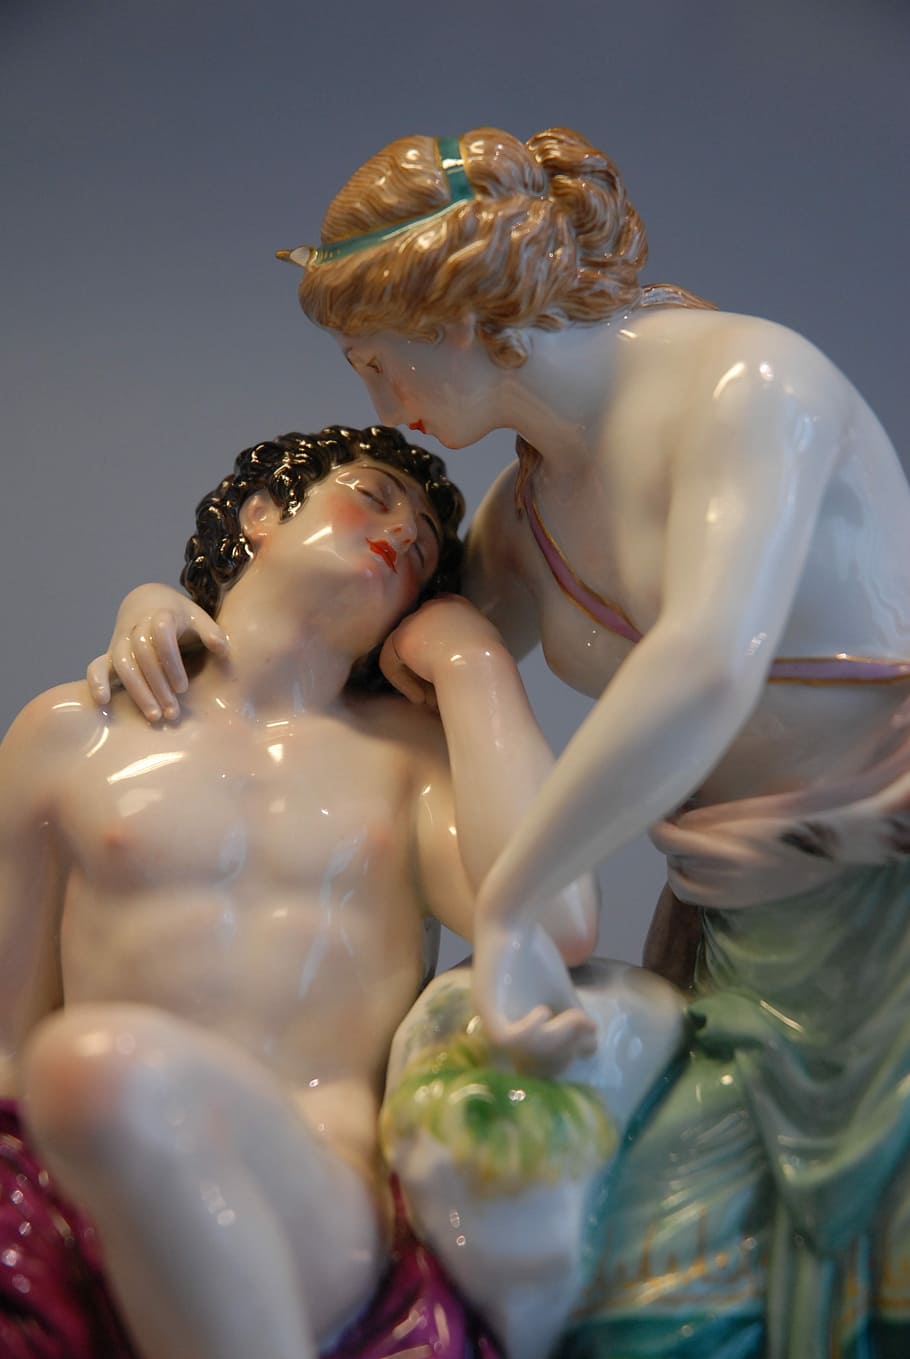 Love, Porcelain, Lovers, china figures, tenderness, shirtless